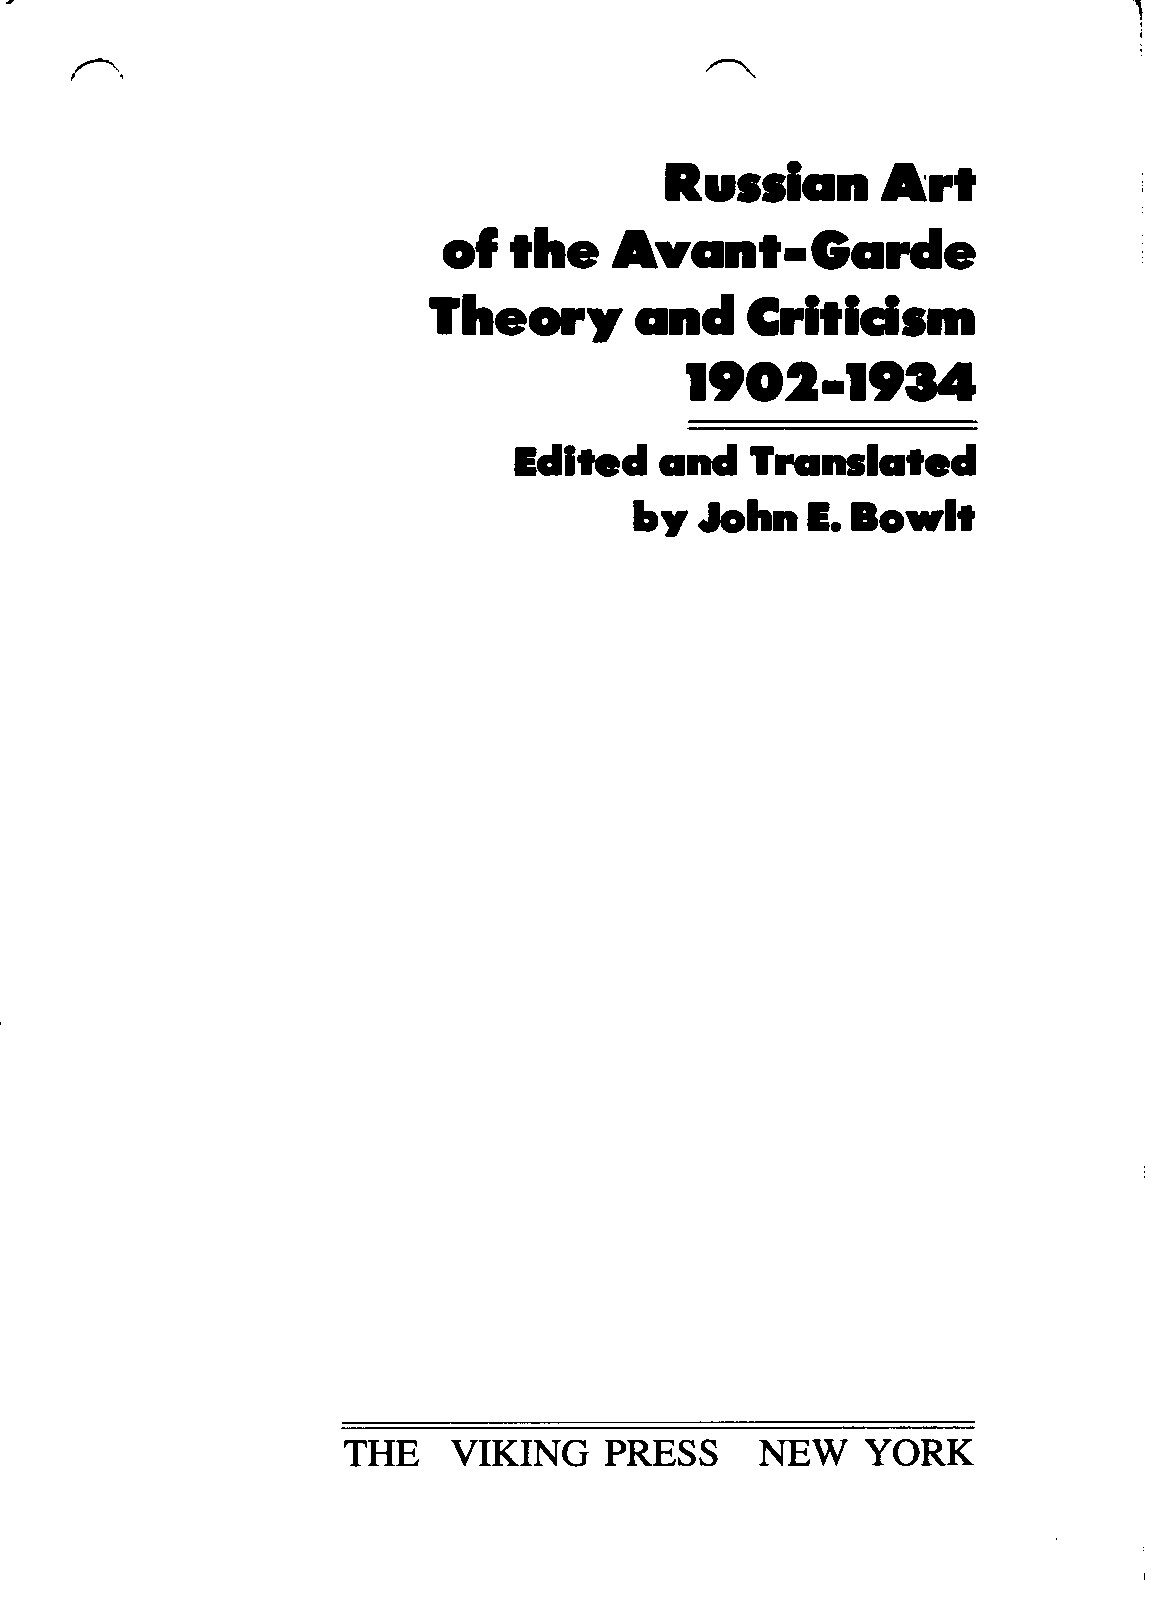 Russian Art of the Avant-Garde Theory and Criticism : 1902—1934 / Edited and Translated by John E. Bowlt